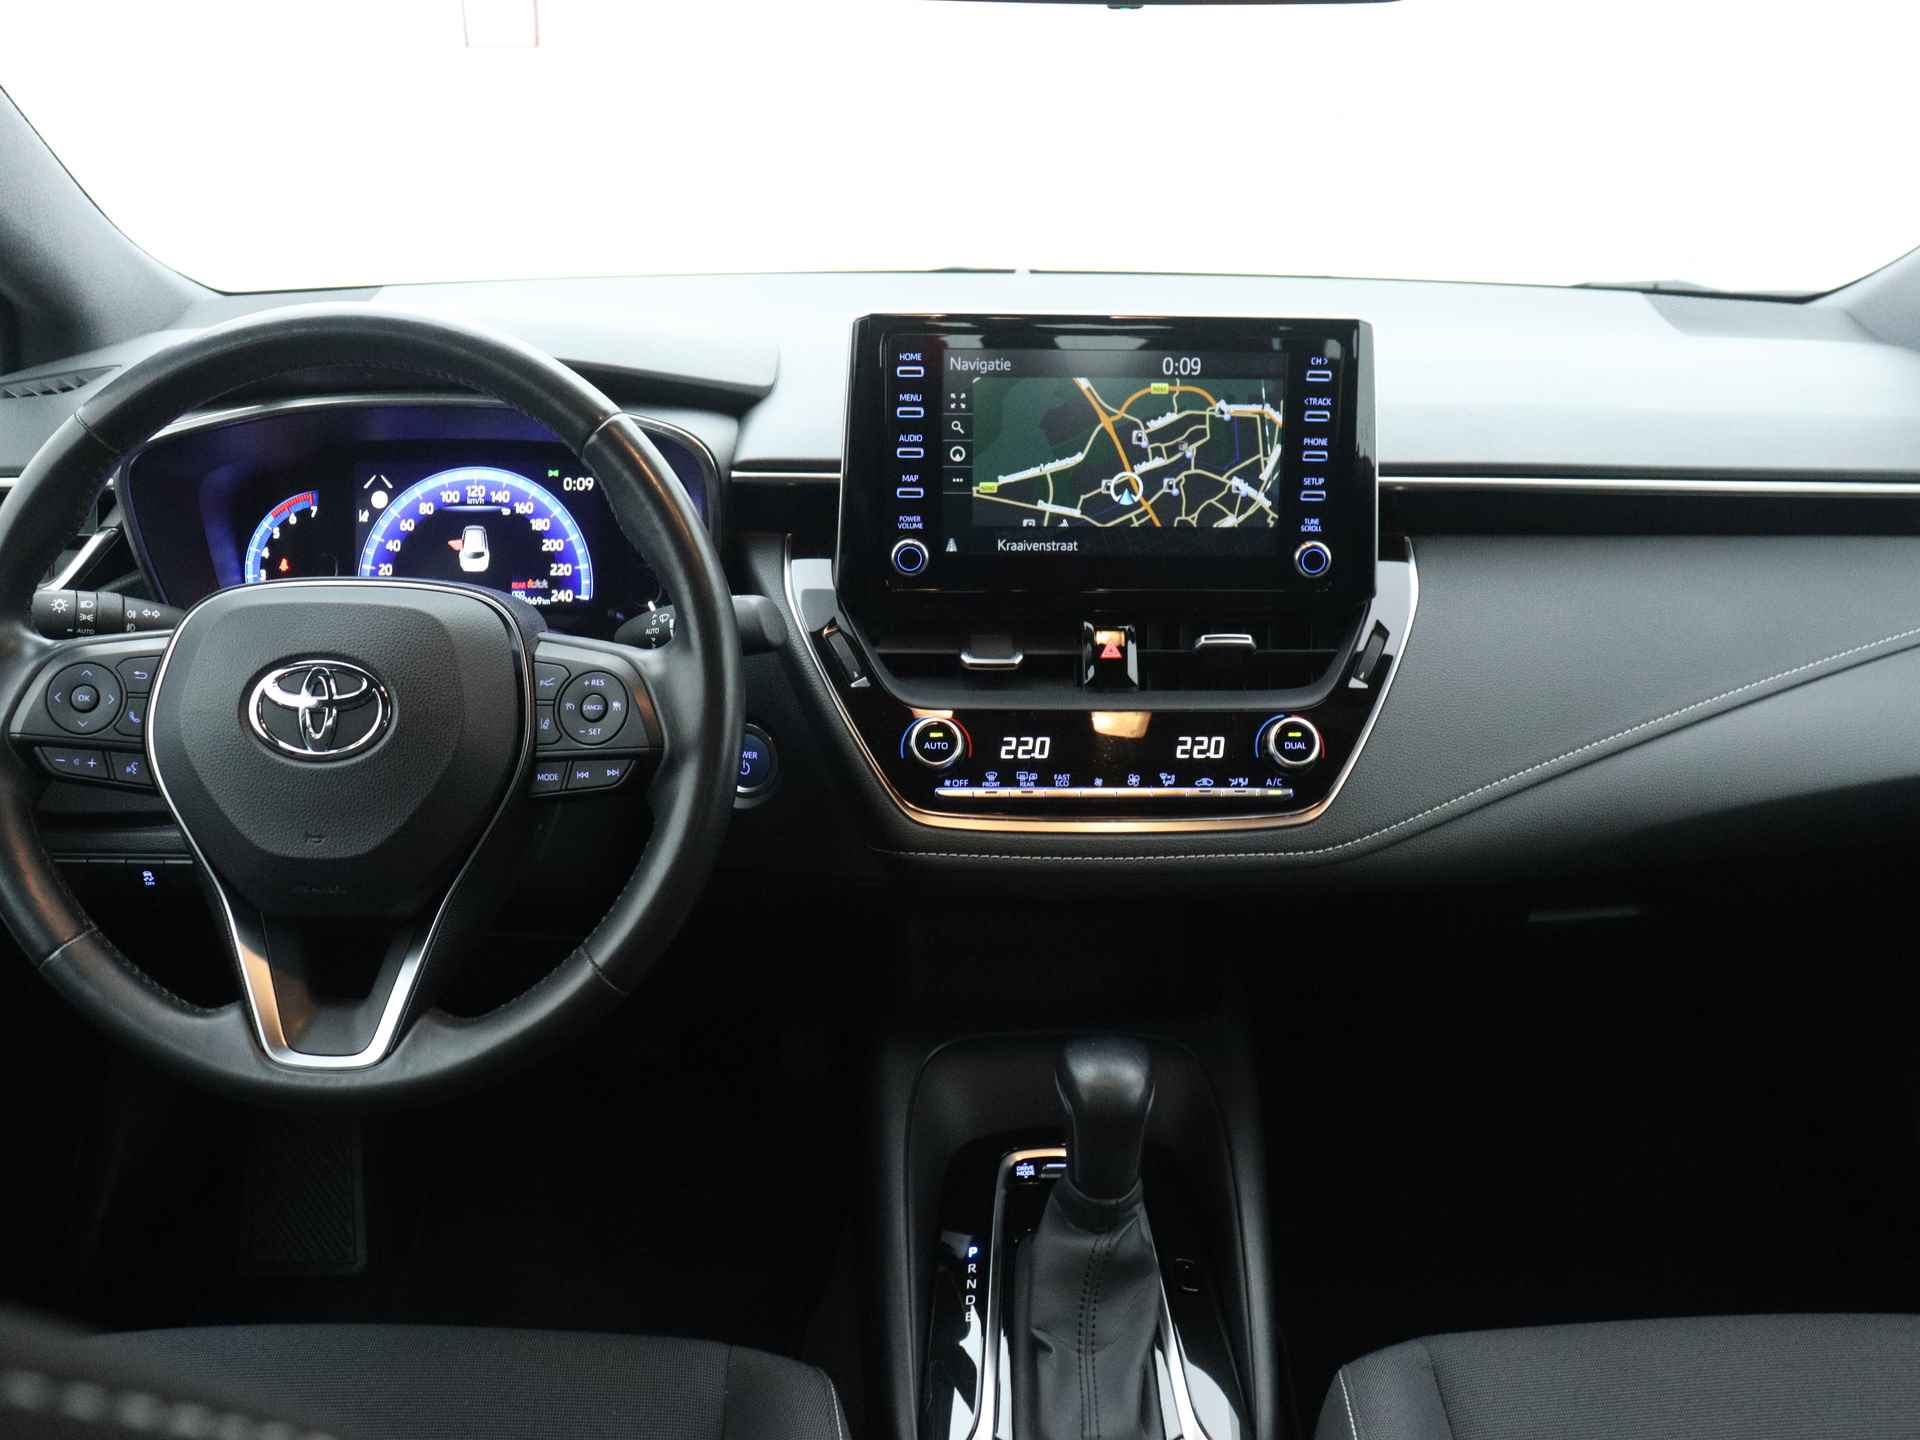 Toyota Corolla Touring Sports 1.8 Hybrid First Edition Navigatie, achteruitrij camera, climate control, etc... - 6/37